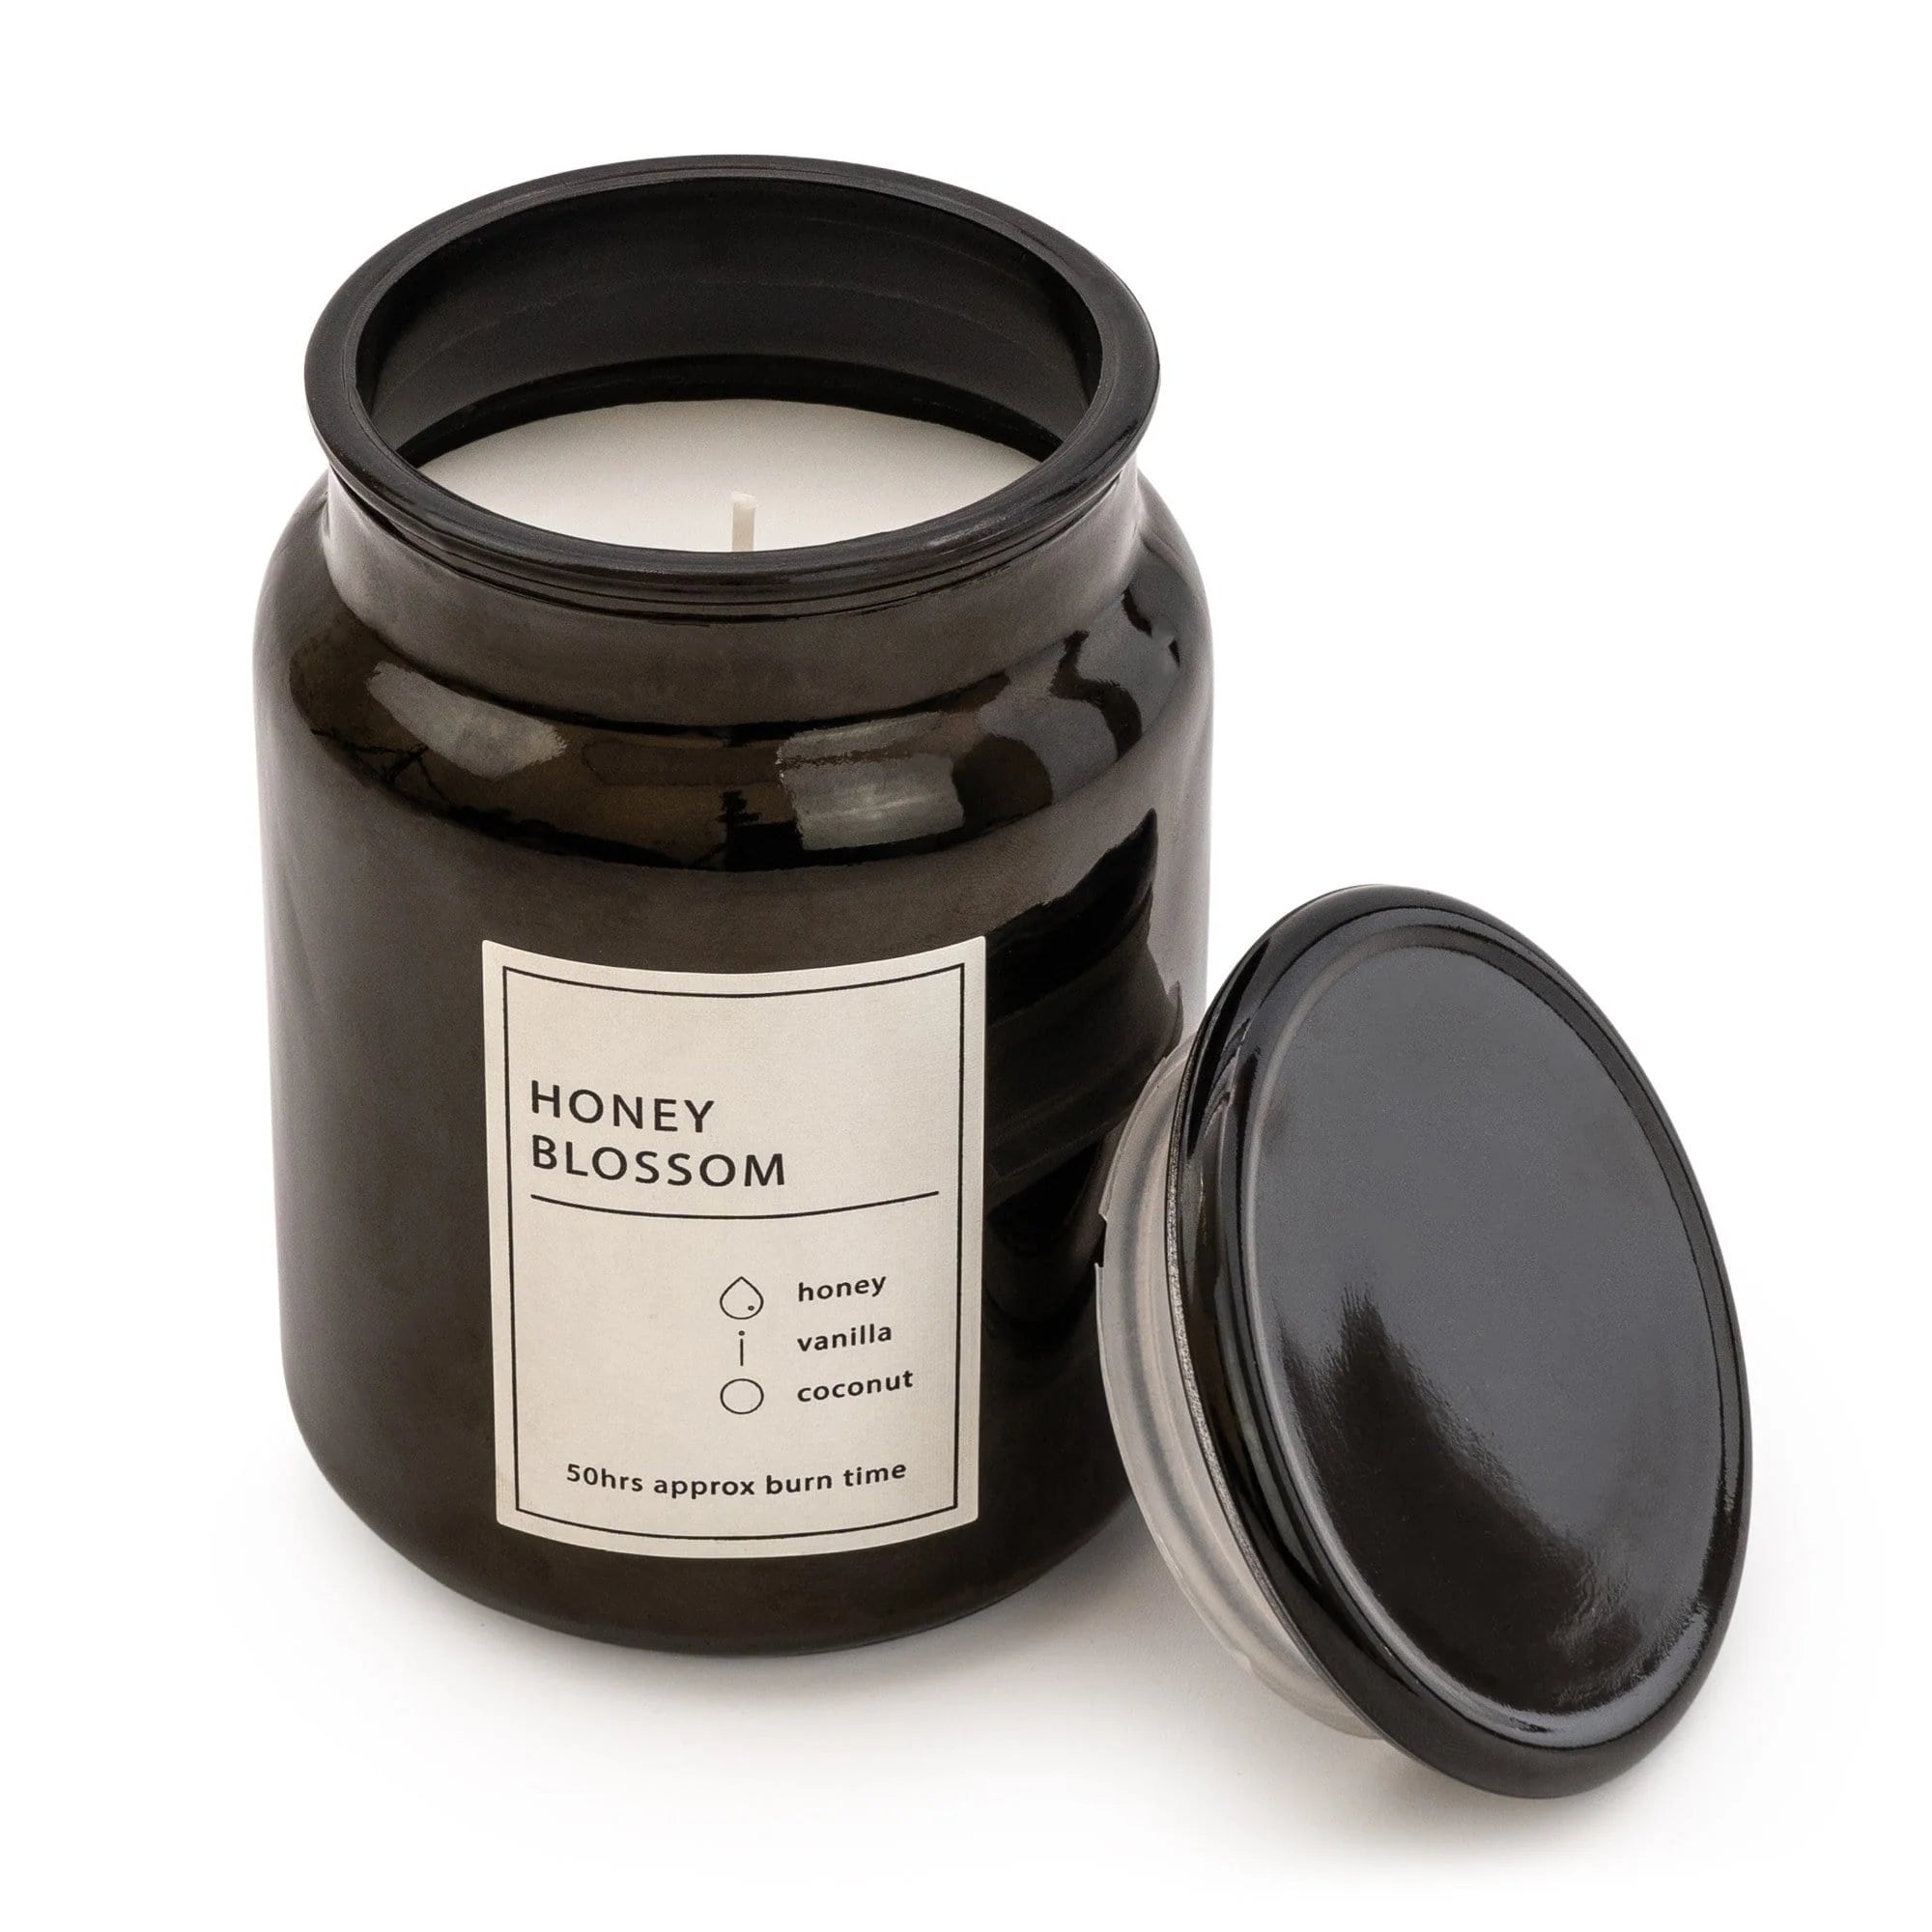 HONEY BLOSSOM SCENTED CANDLE